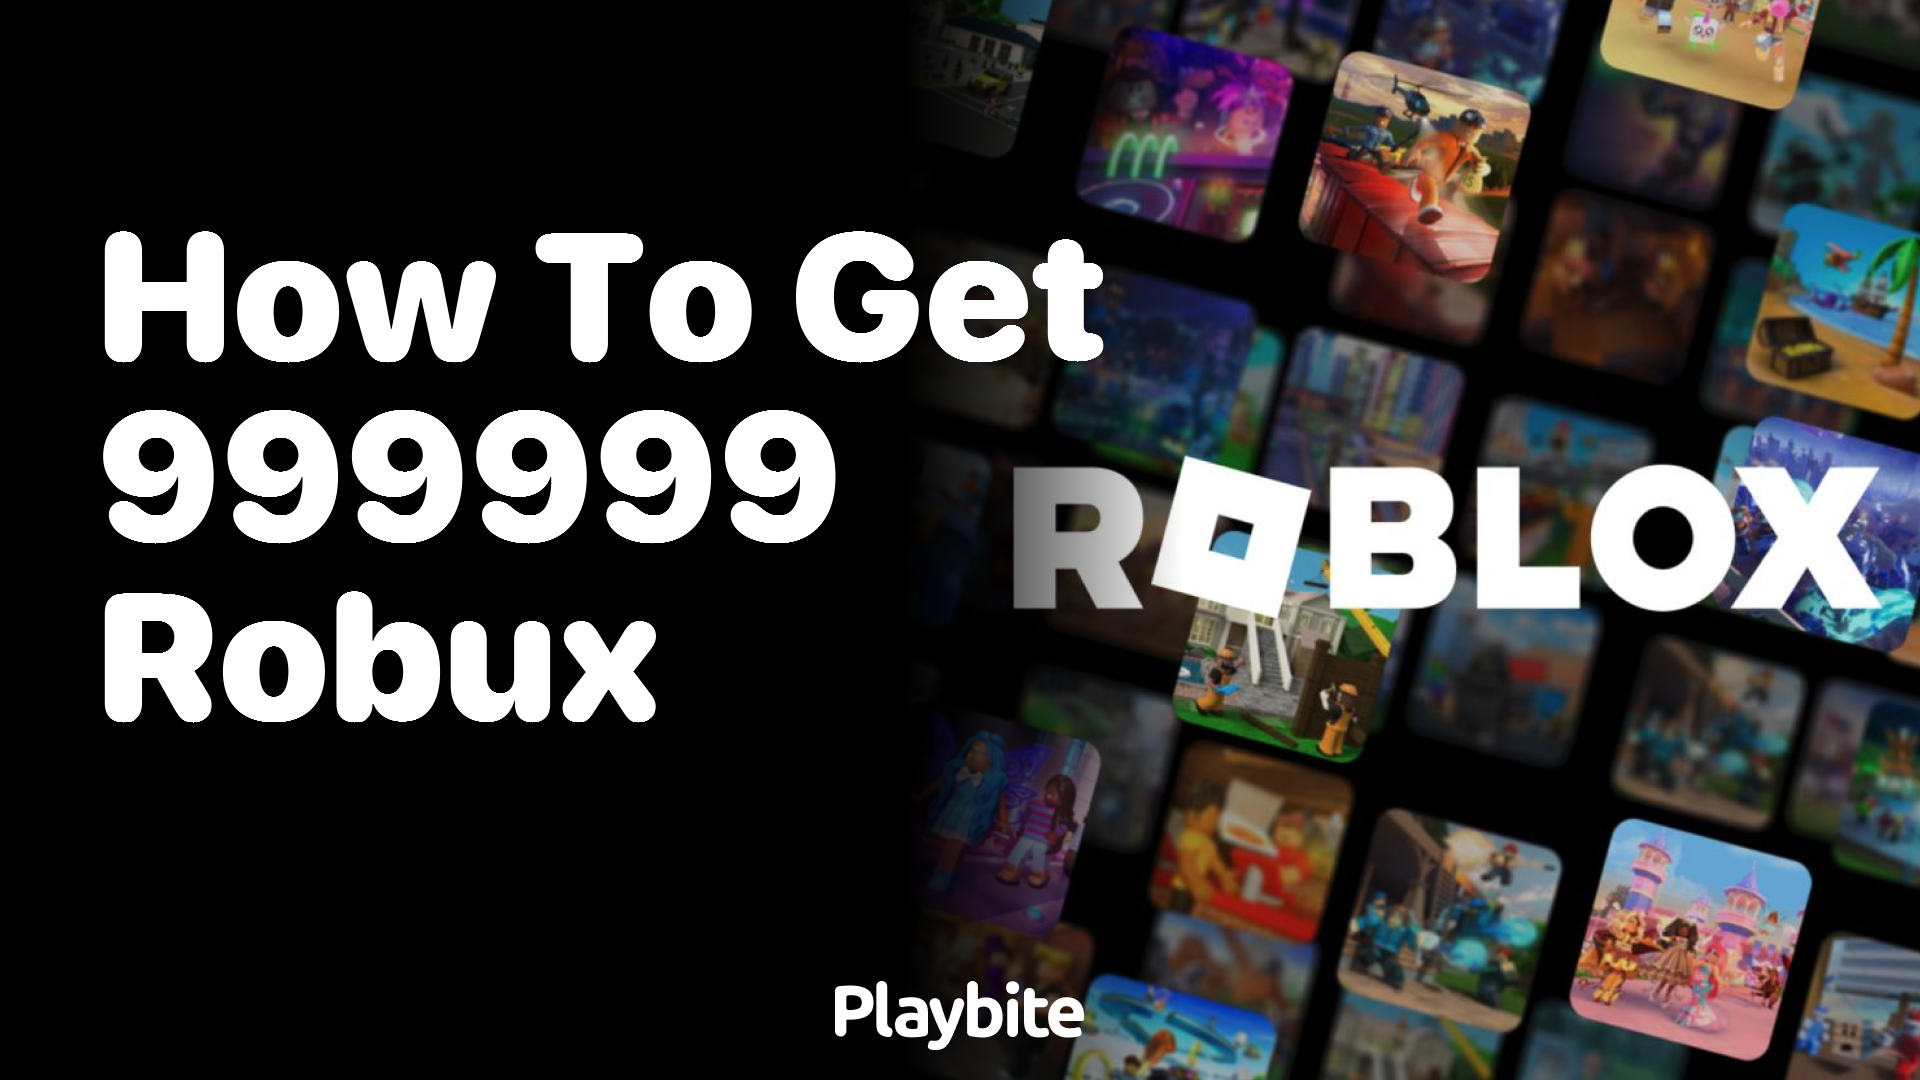 How to Get 999,999 Robux in Roblox?